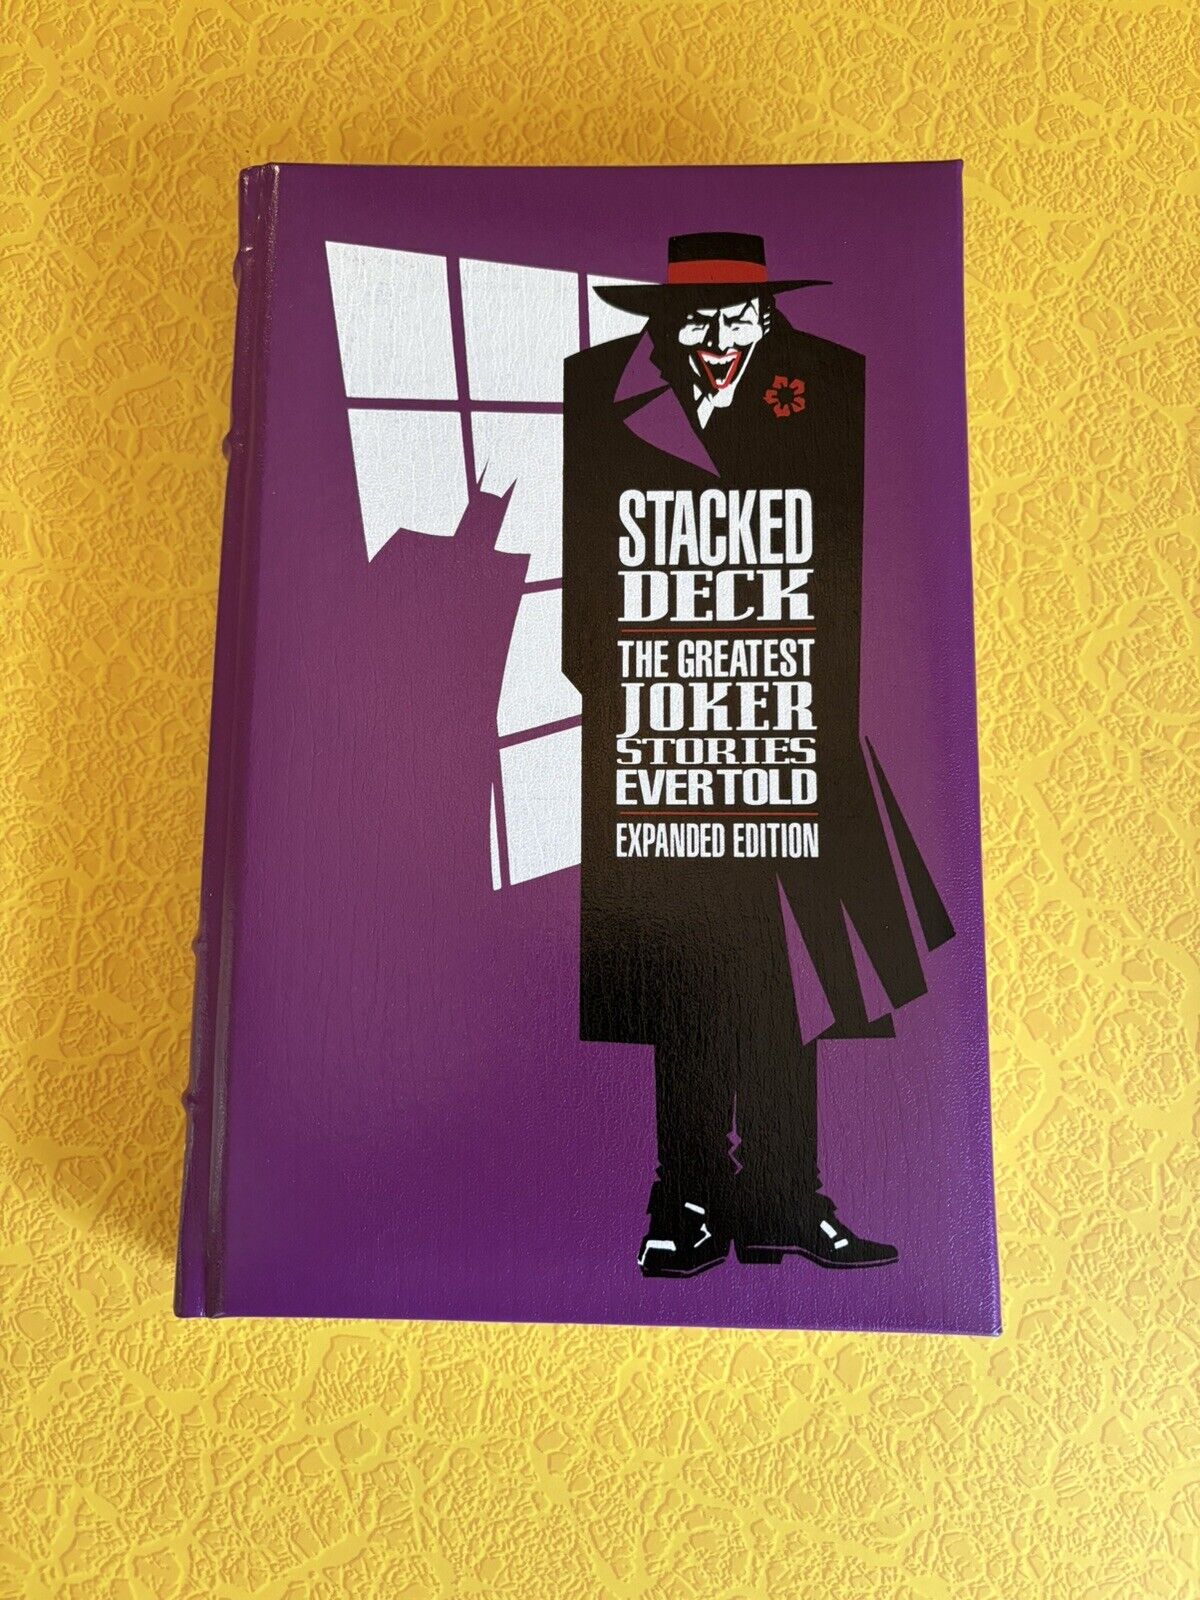 Stacked Deck The Greatest Joker Stories Ever Told Expanded Ed Hardback 